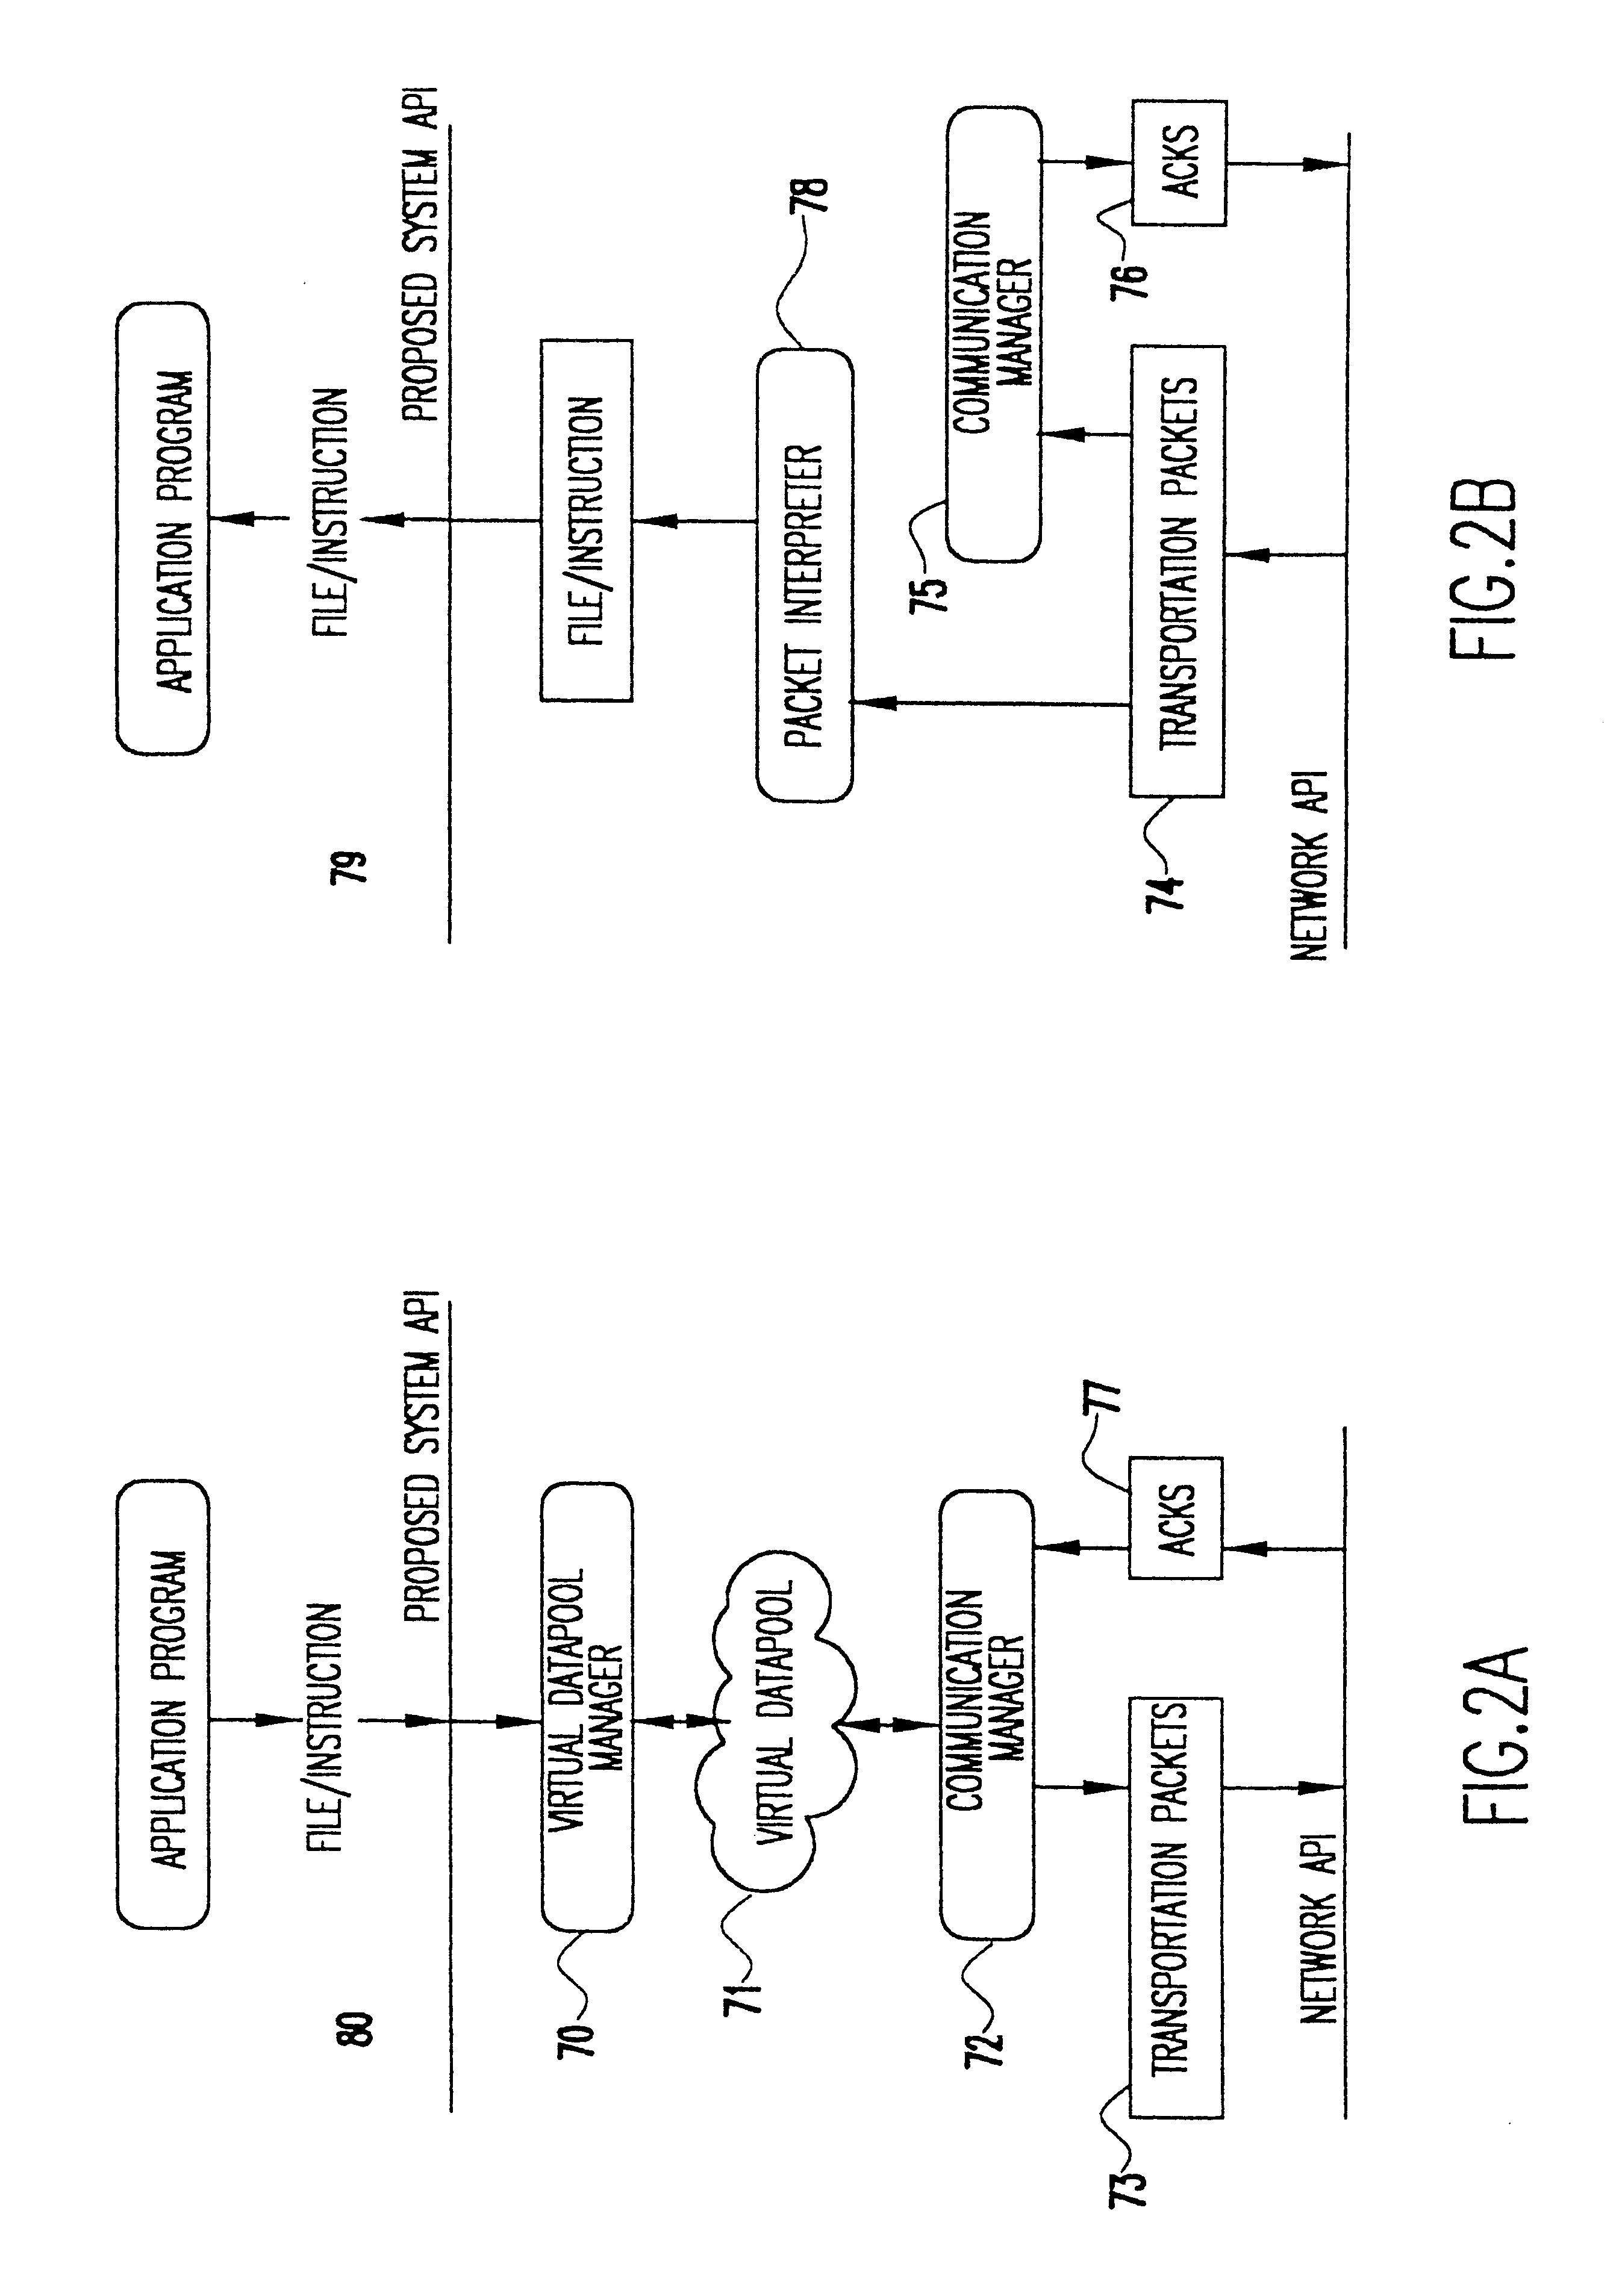 Data transfer mechanism for handheld devices over a wireless communication link